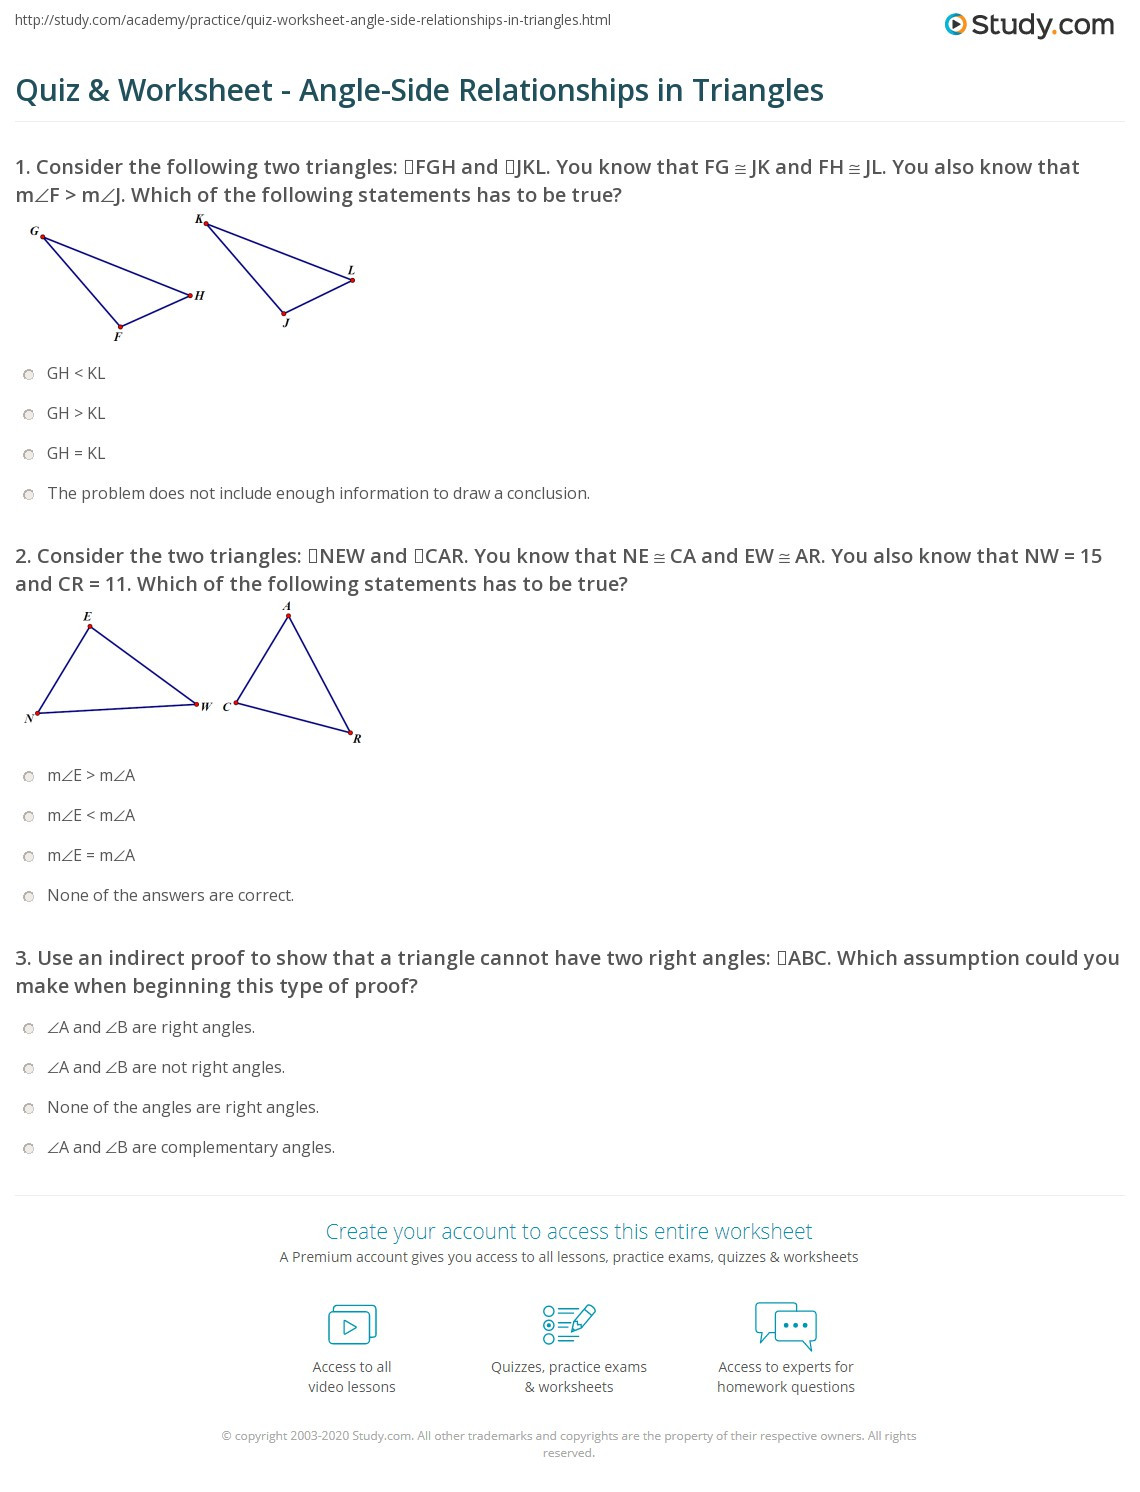 Geometry Proof Practice Worksheet Quiz &amp; Worksheet Angle Side Relationships In Triangles